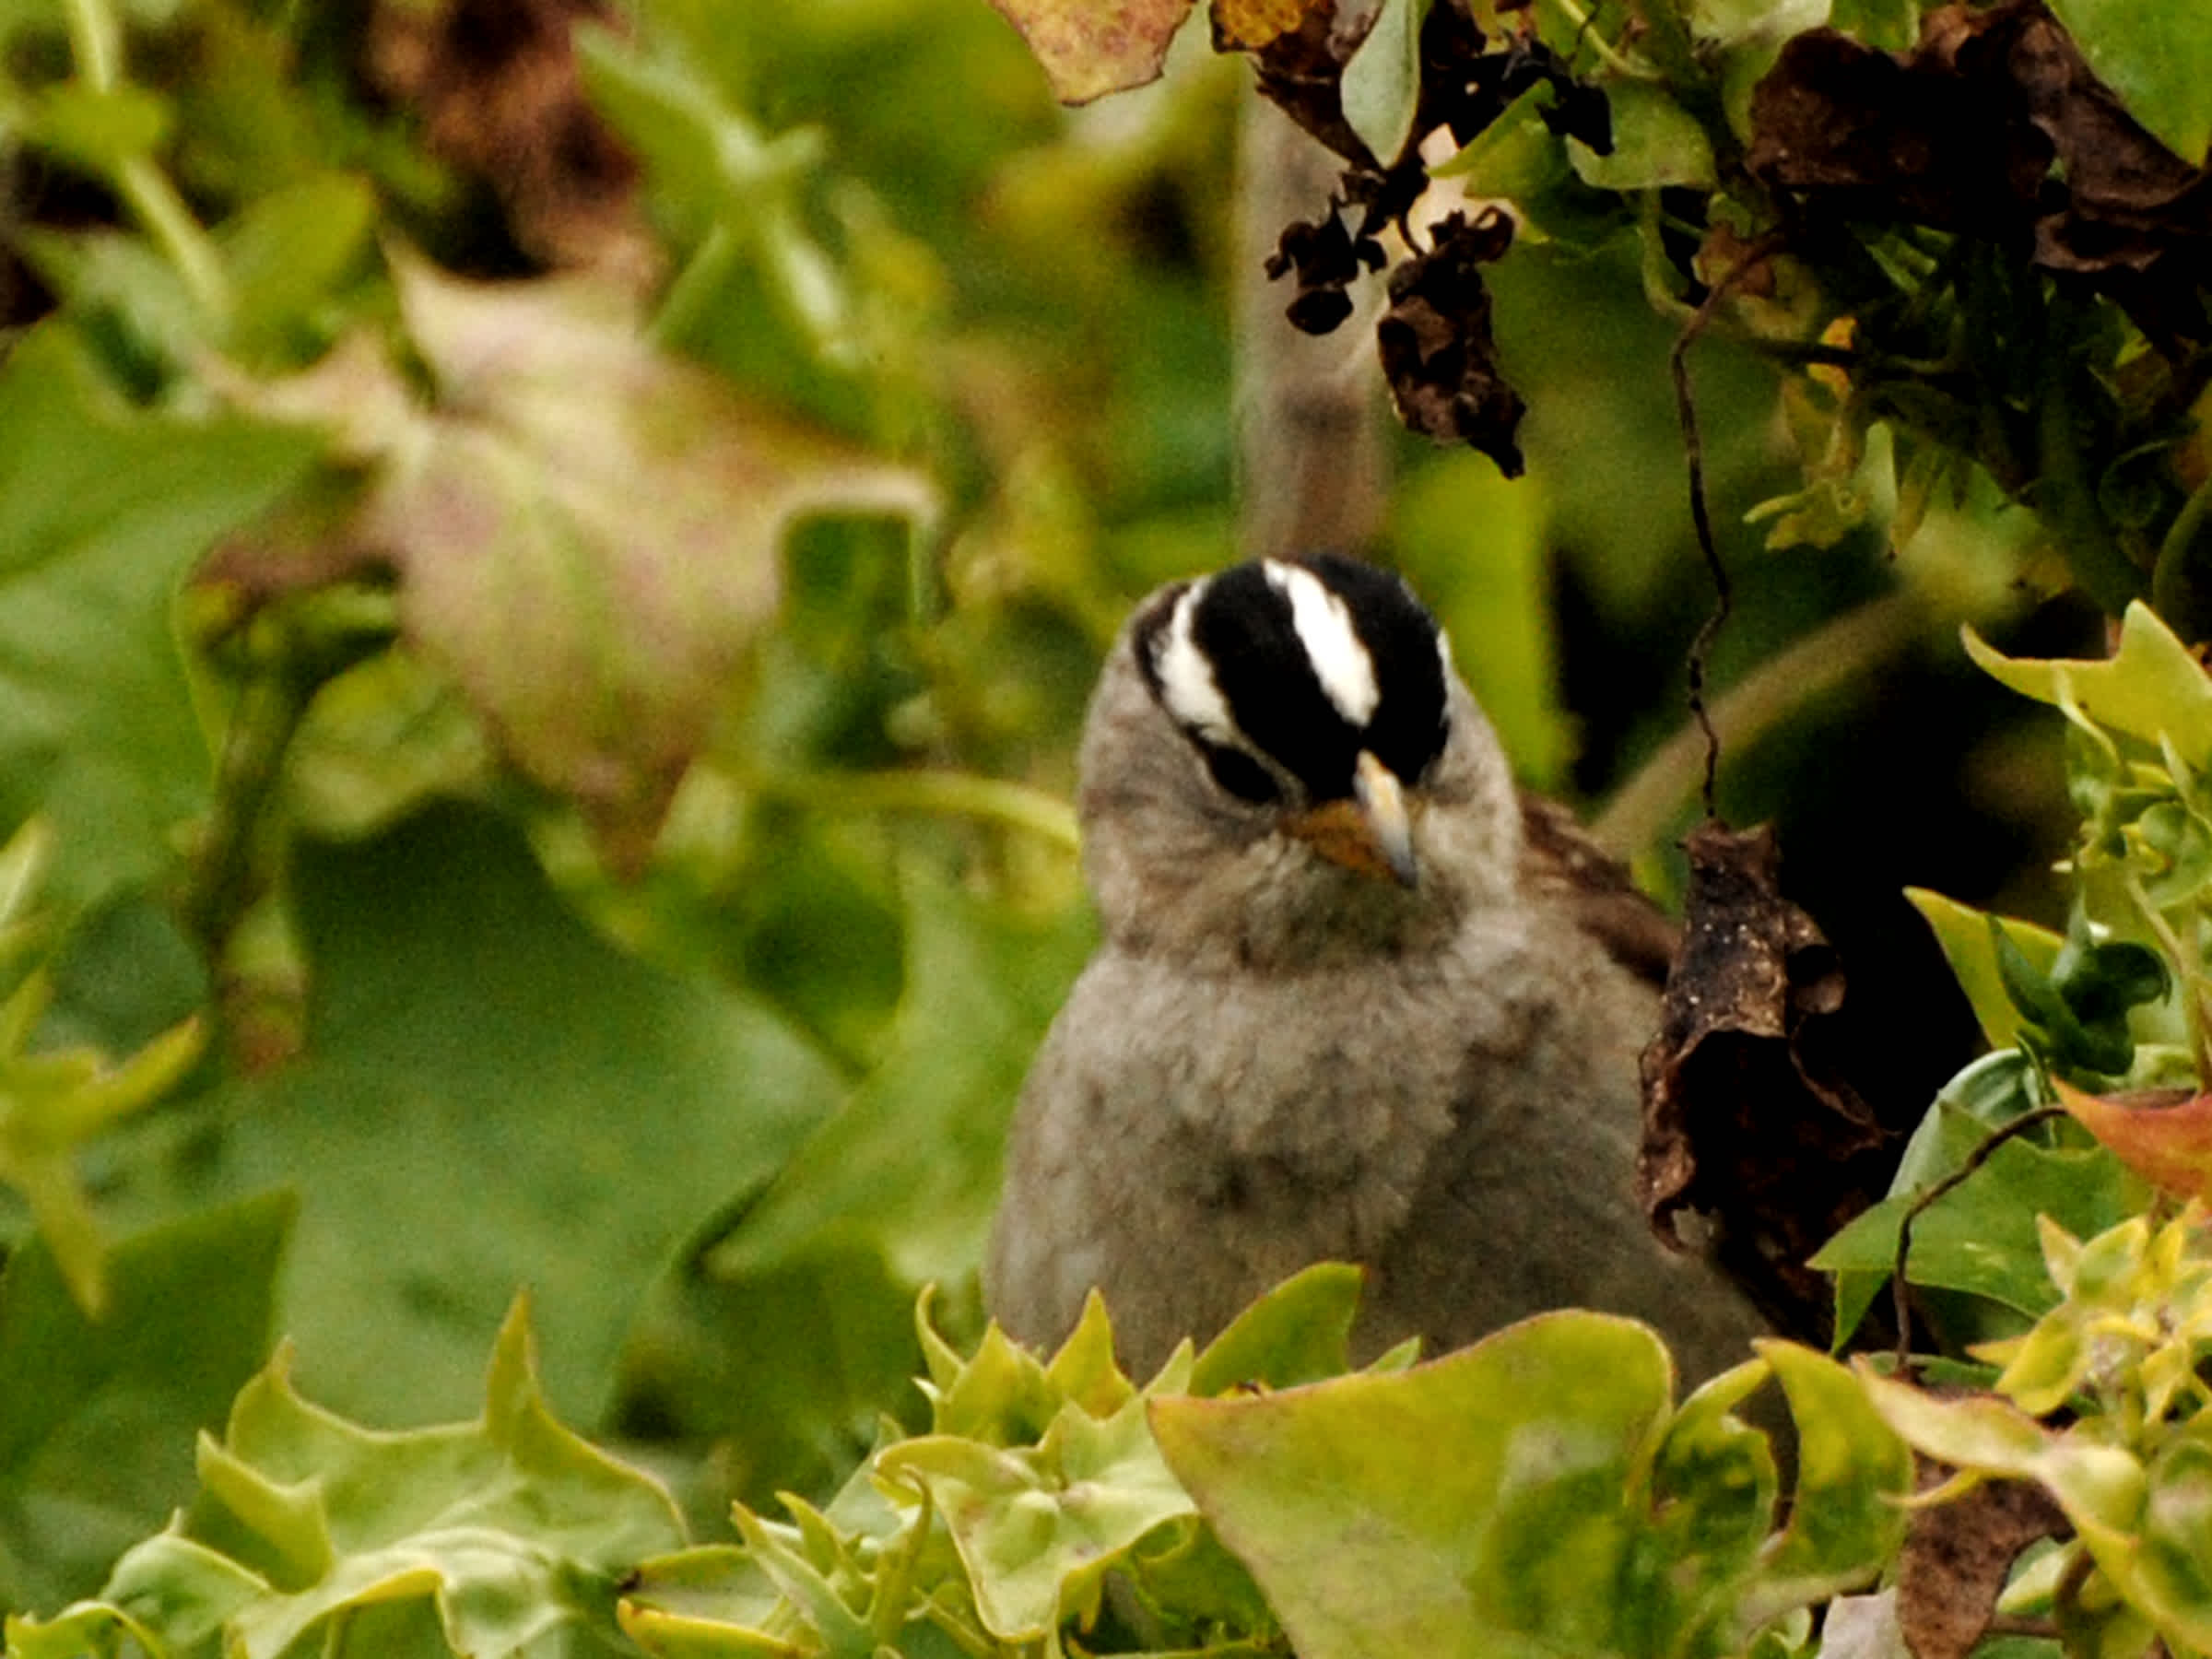 Bird sitting among the leaves.